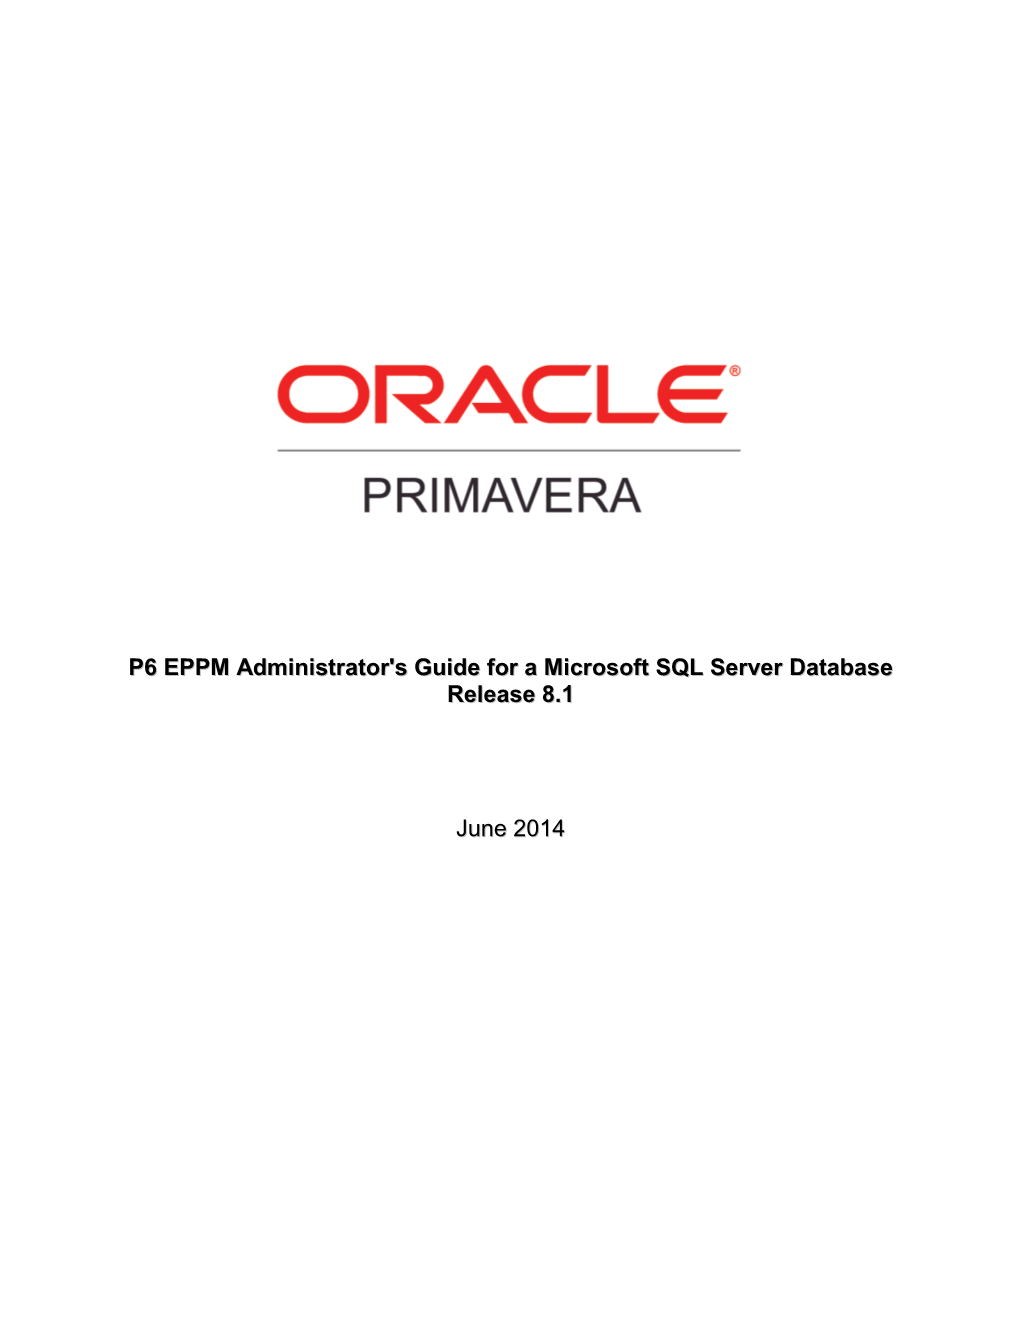 P6 EPPM Administrator's Guide for a Microsoft SQL Server Database Release 8.1